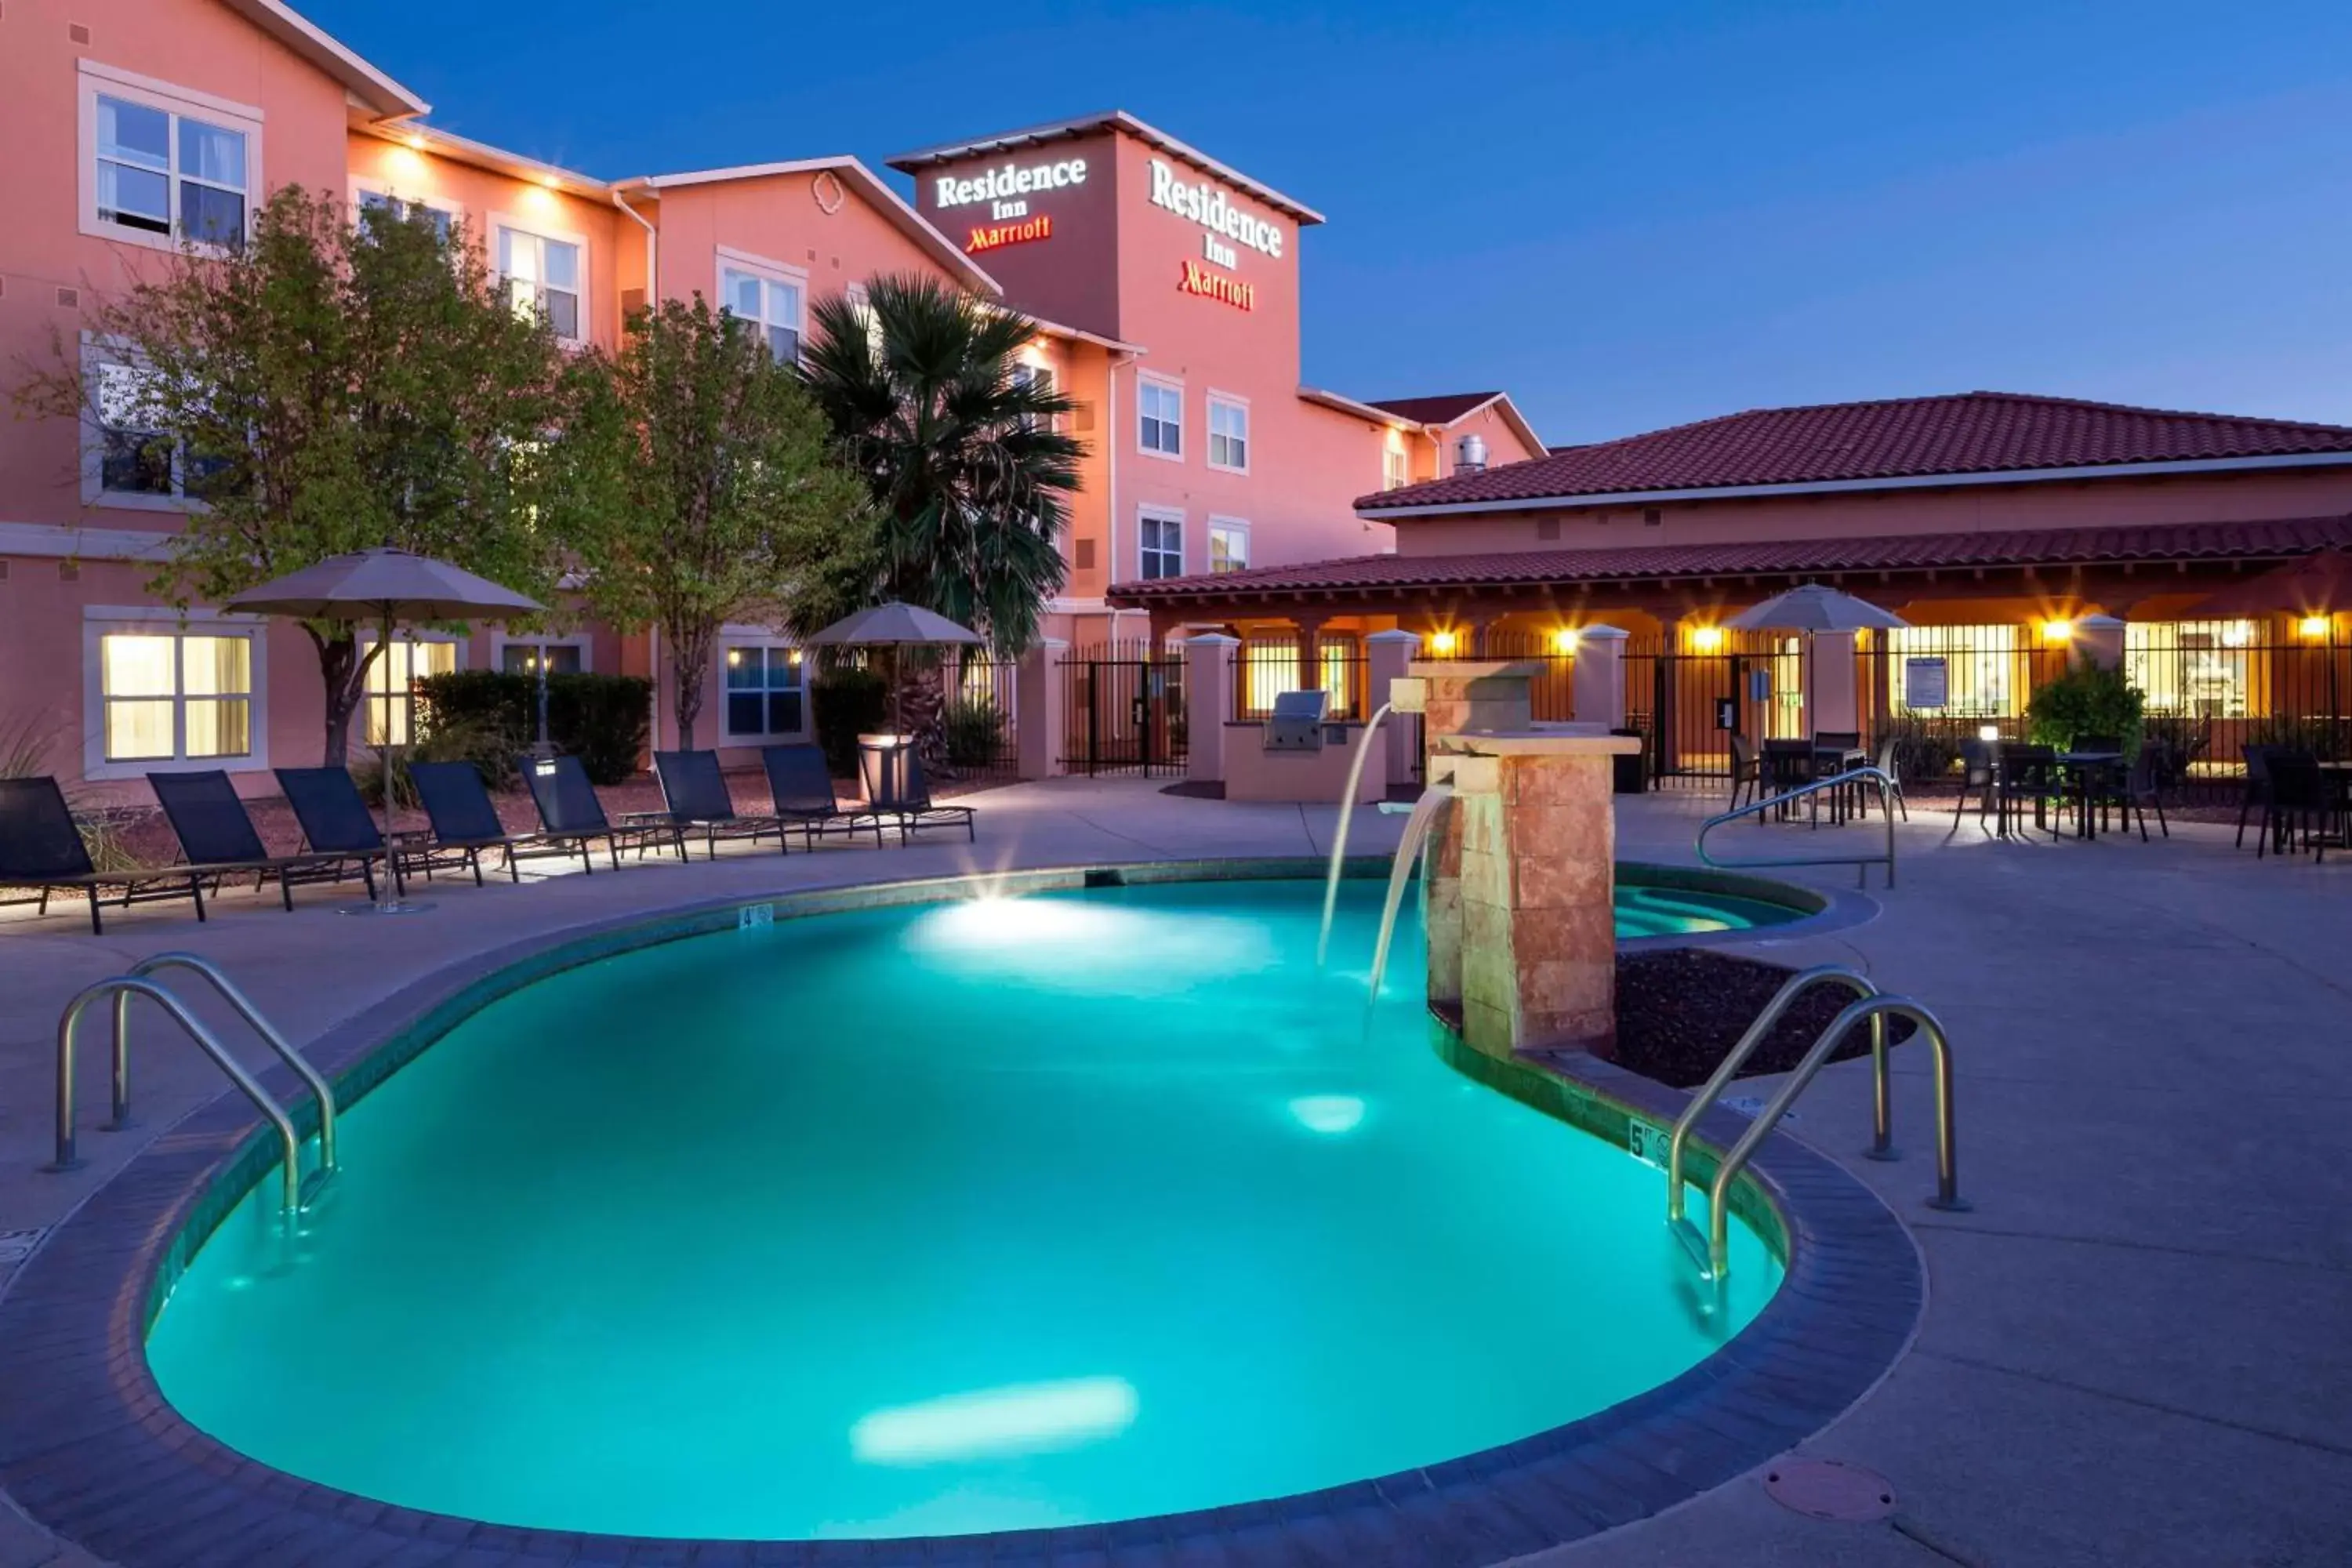 Swimming pool, Property Building in Residence Inn Tucson Airport